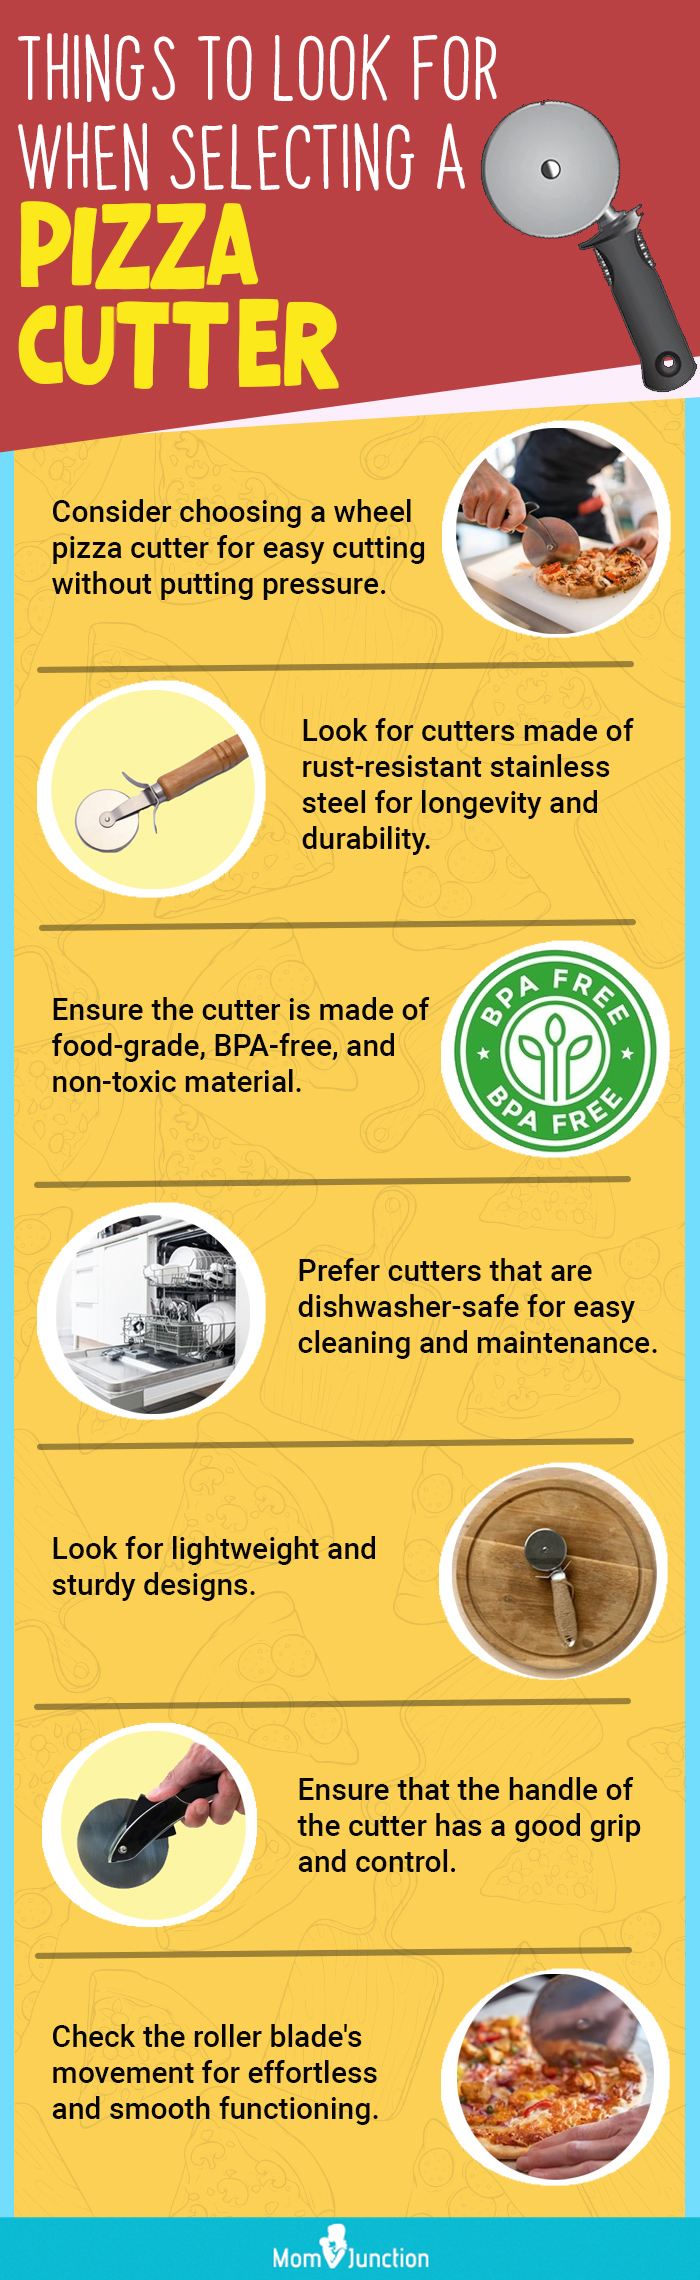 Things To Look For When Selecting A Pizza Cutter (infographic)